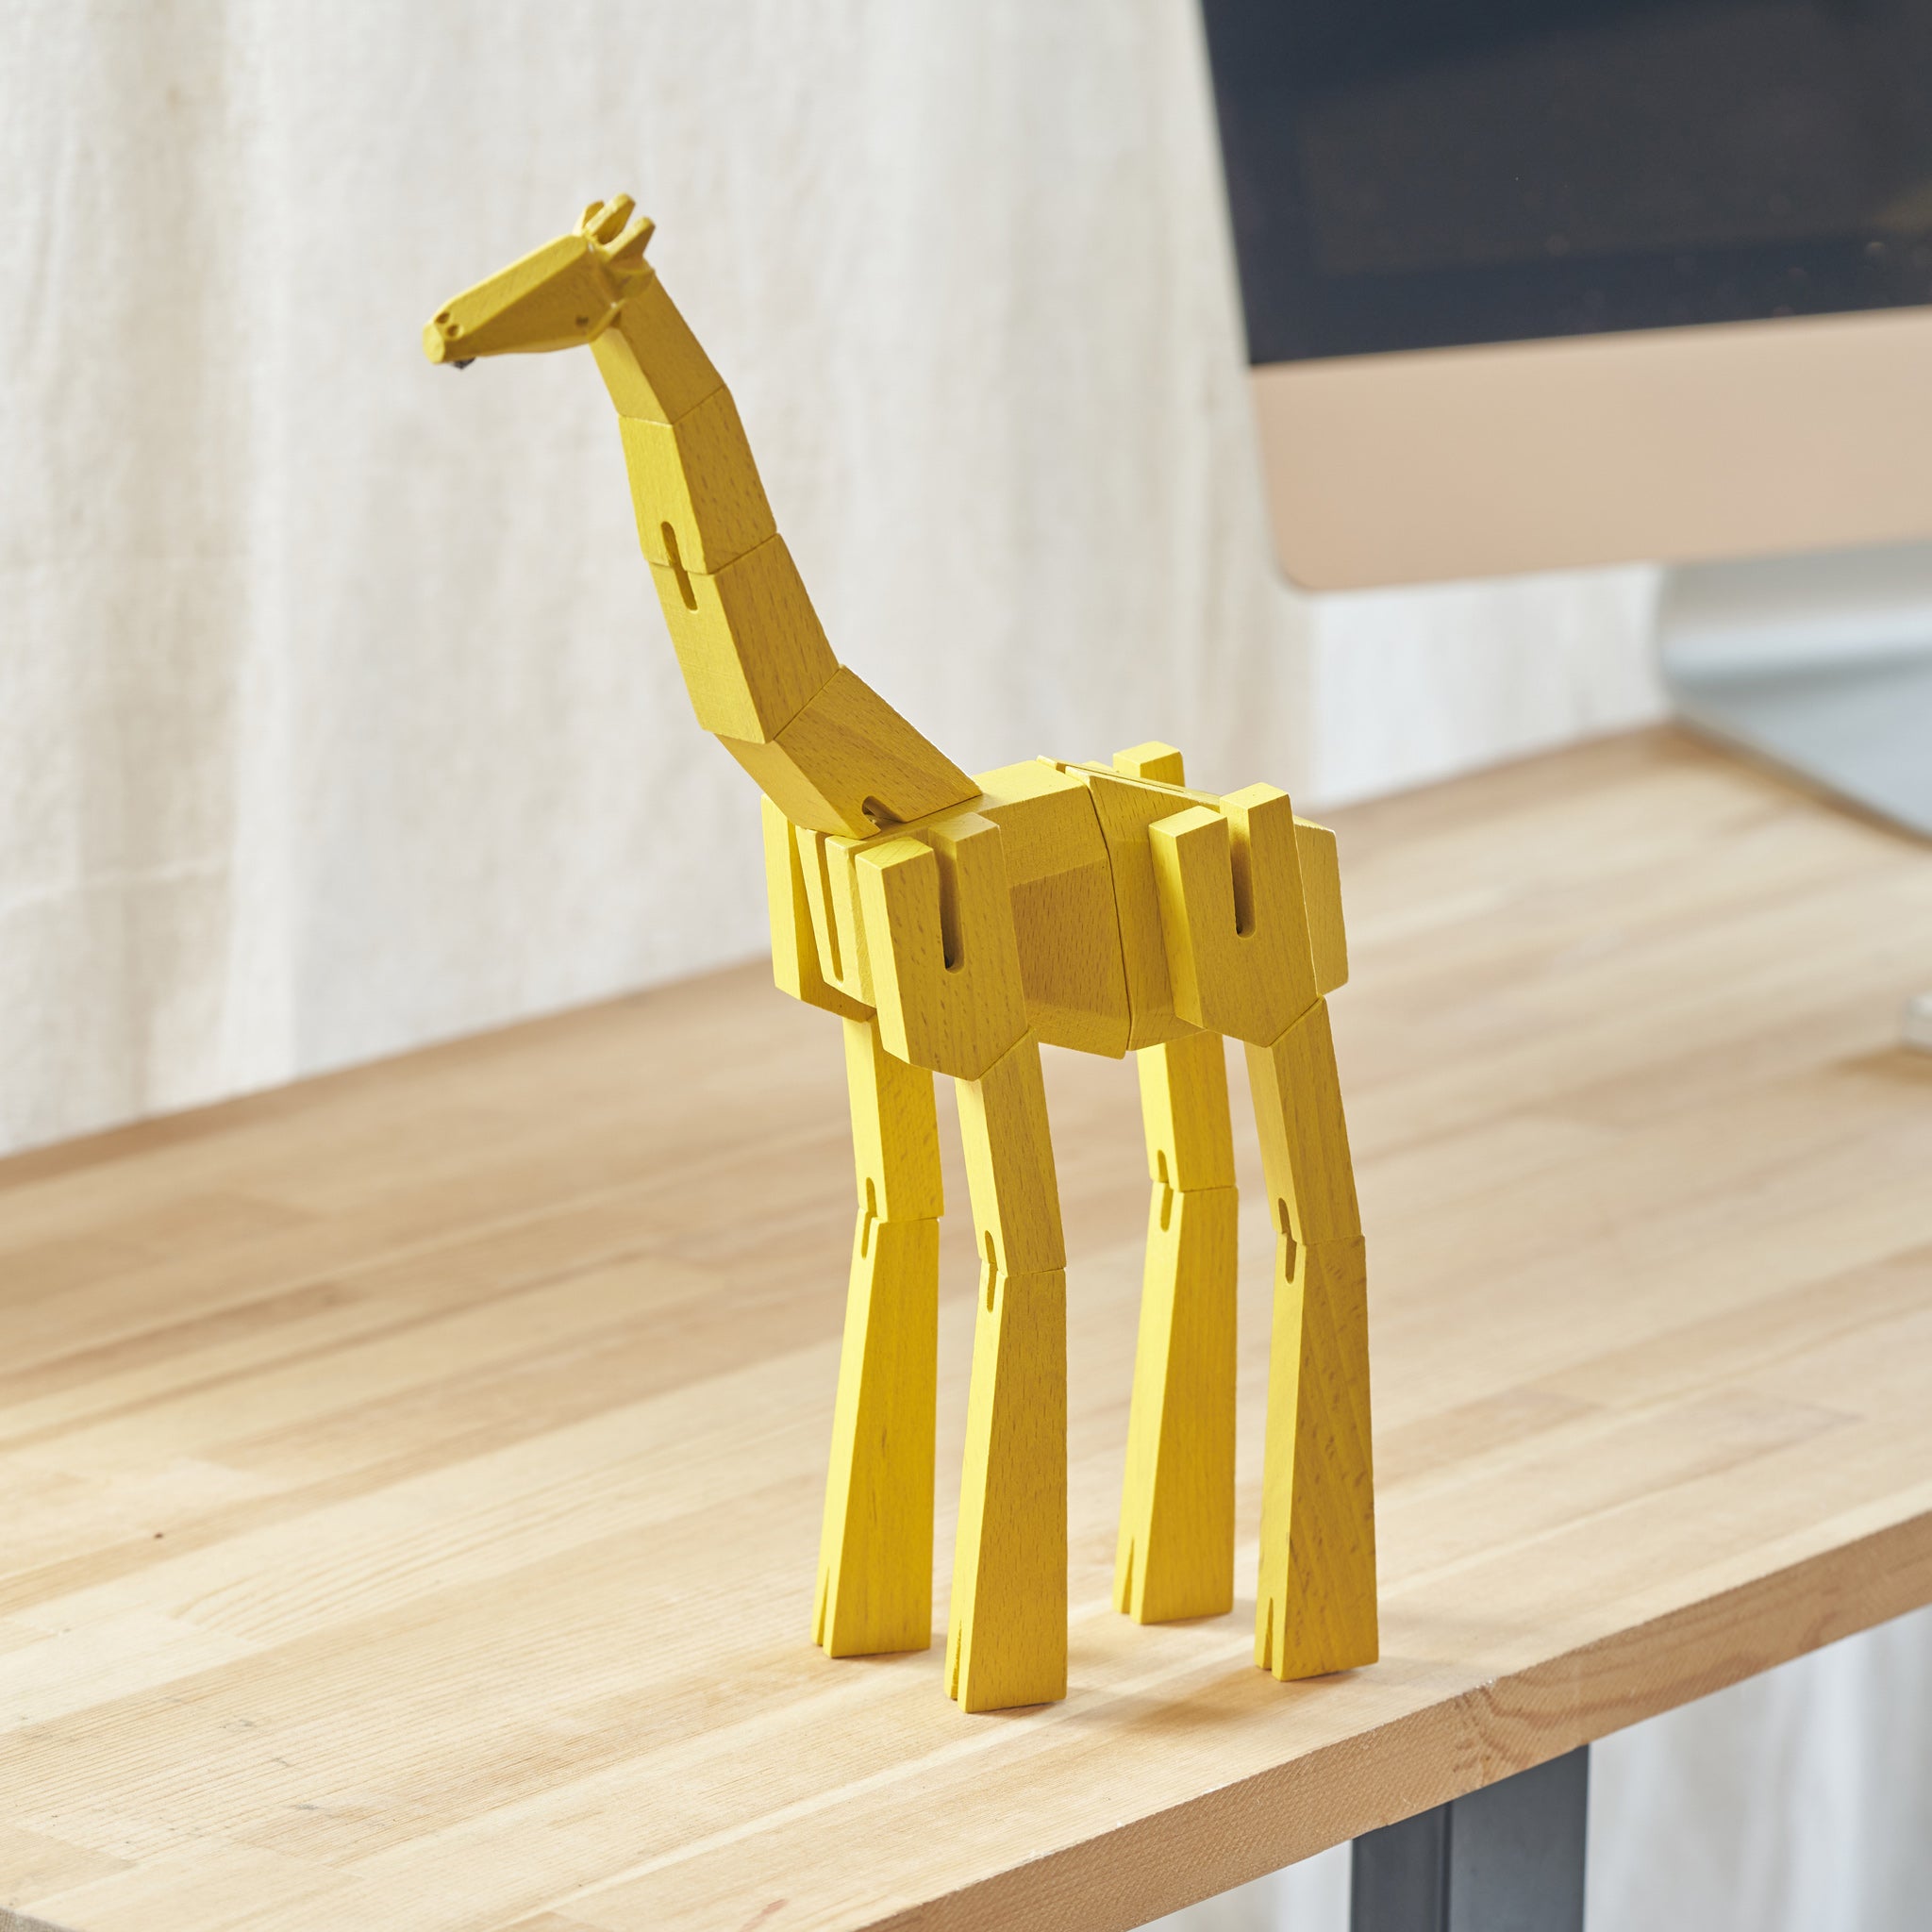 Morphits ® Giraffe Wooden Toy: Elevate Playtime with Tall Tales in our Wooden Playset World